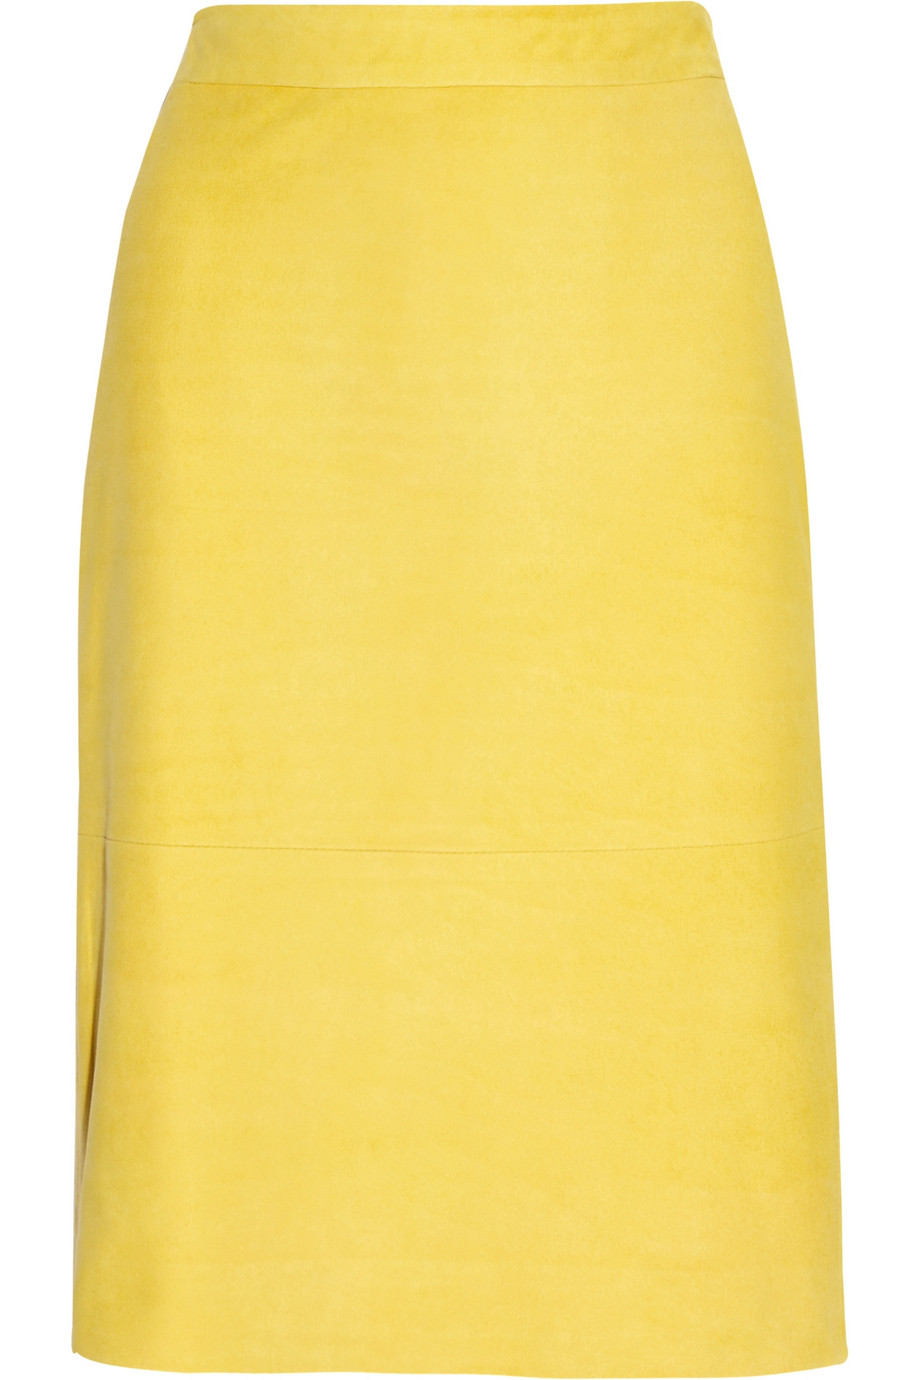 Lyst - J.Crew Leather Pencil Skirt in Yellow